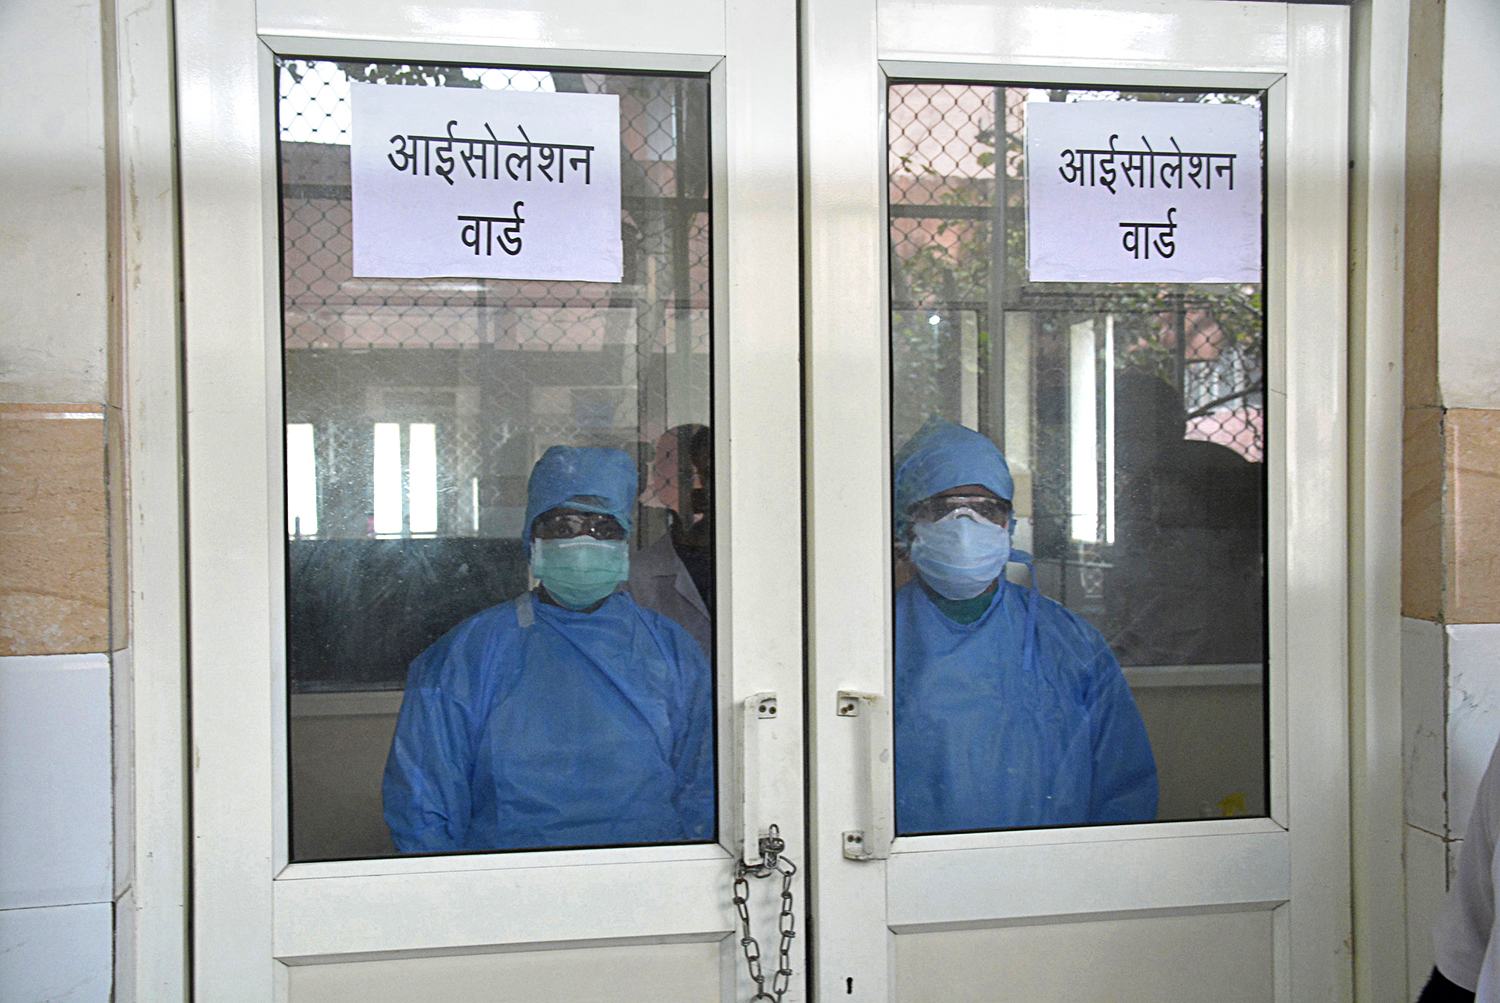 Bihar’s junior doctors forced to continue treating COVID-19 patients despite showing symptoms